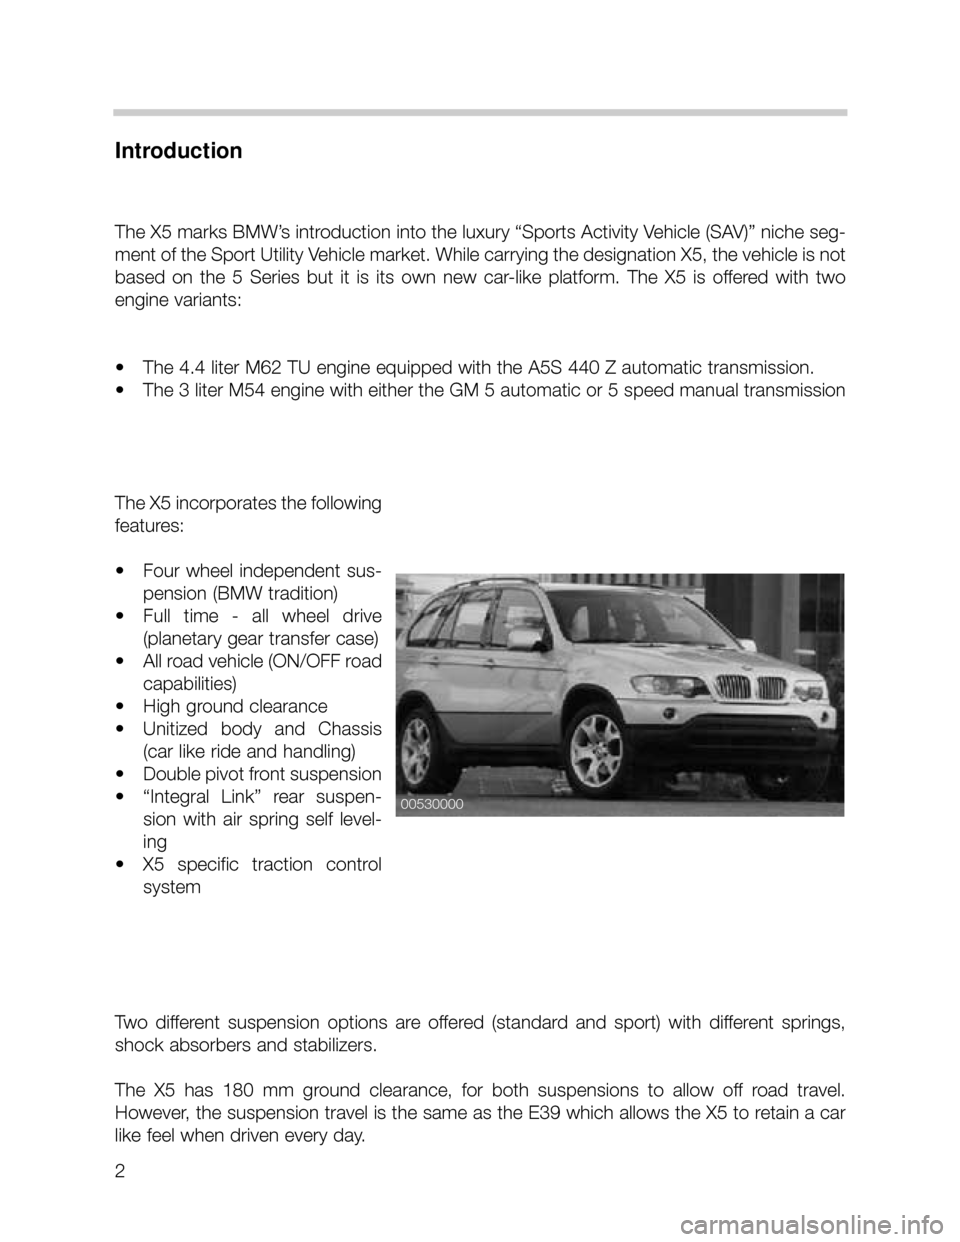 BMW X5 2004 E53 Workshop Manual 2
Introduction
The X5 marks BMW’s introduction into the luxury “Sports Activity Vehicle (SAV)” niche seg-
ment of the Sport Utility Vehicle market. While carrying the designation X5, the vehicle